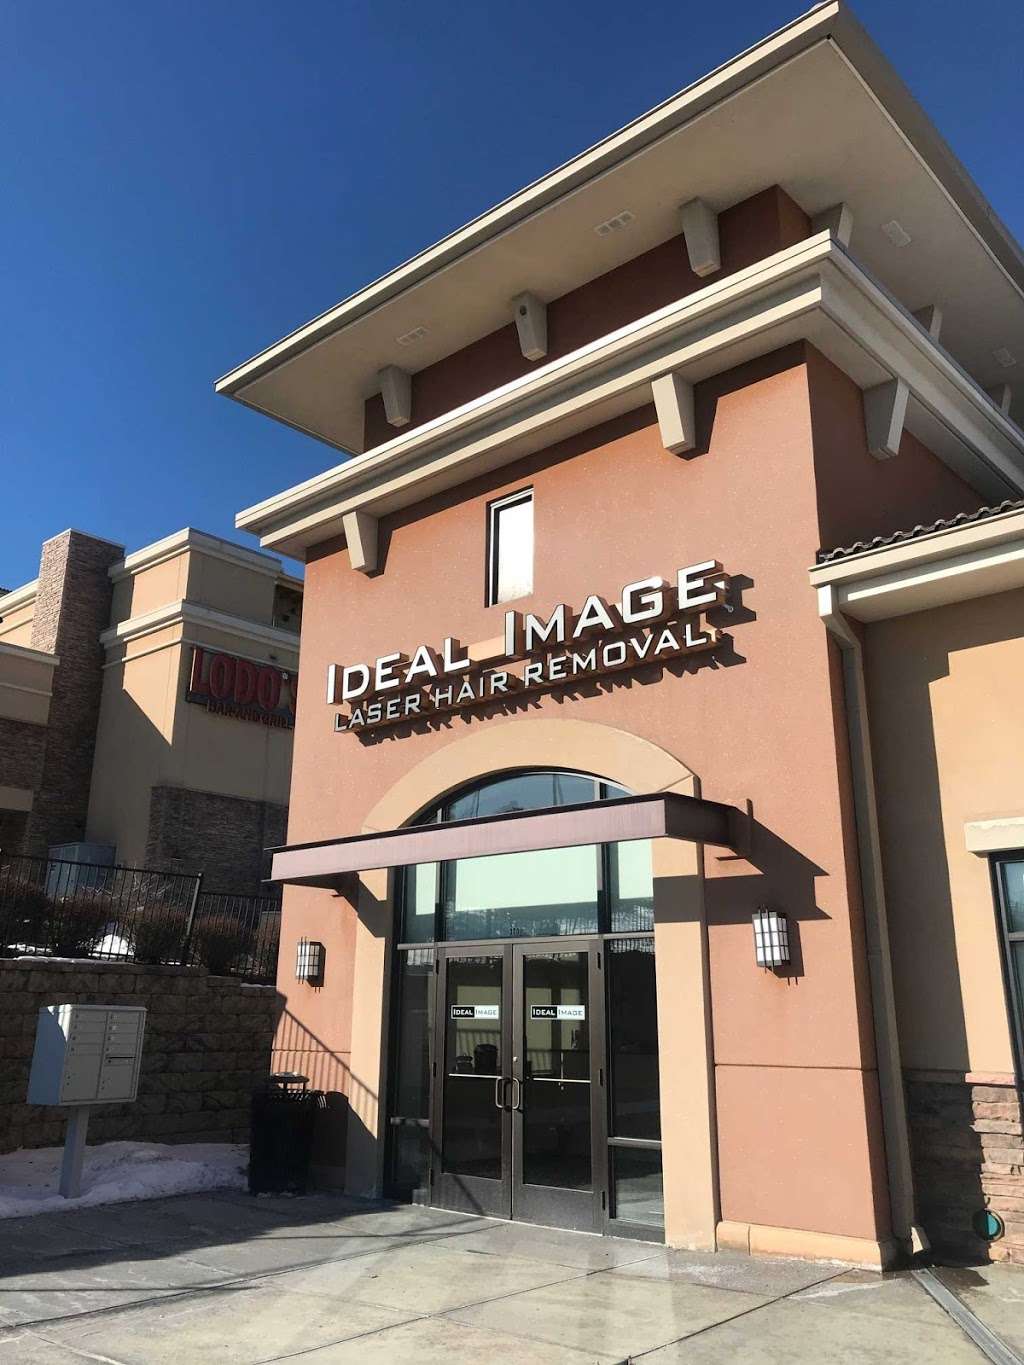 Ideal Image Westminster | 3044 W 105th Ave #300, Westminster, CO 80031, USA | Phone: (303) 255-6038